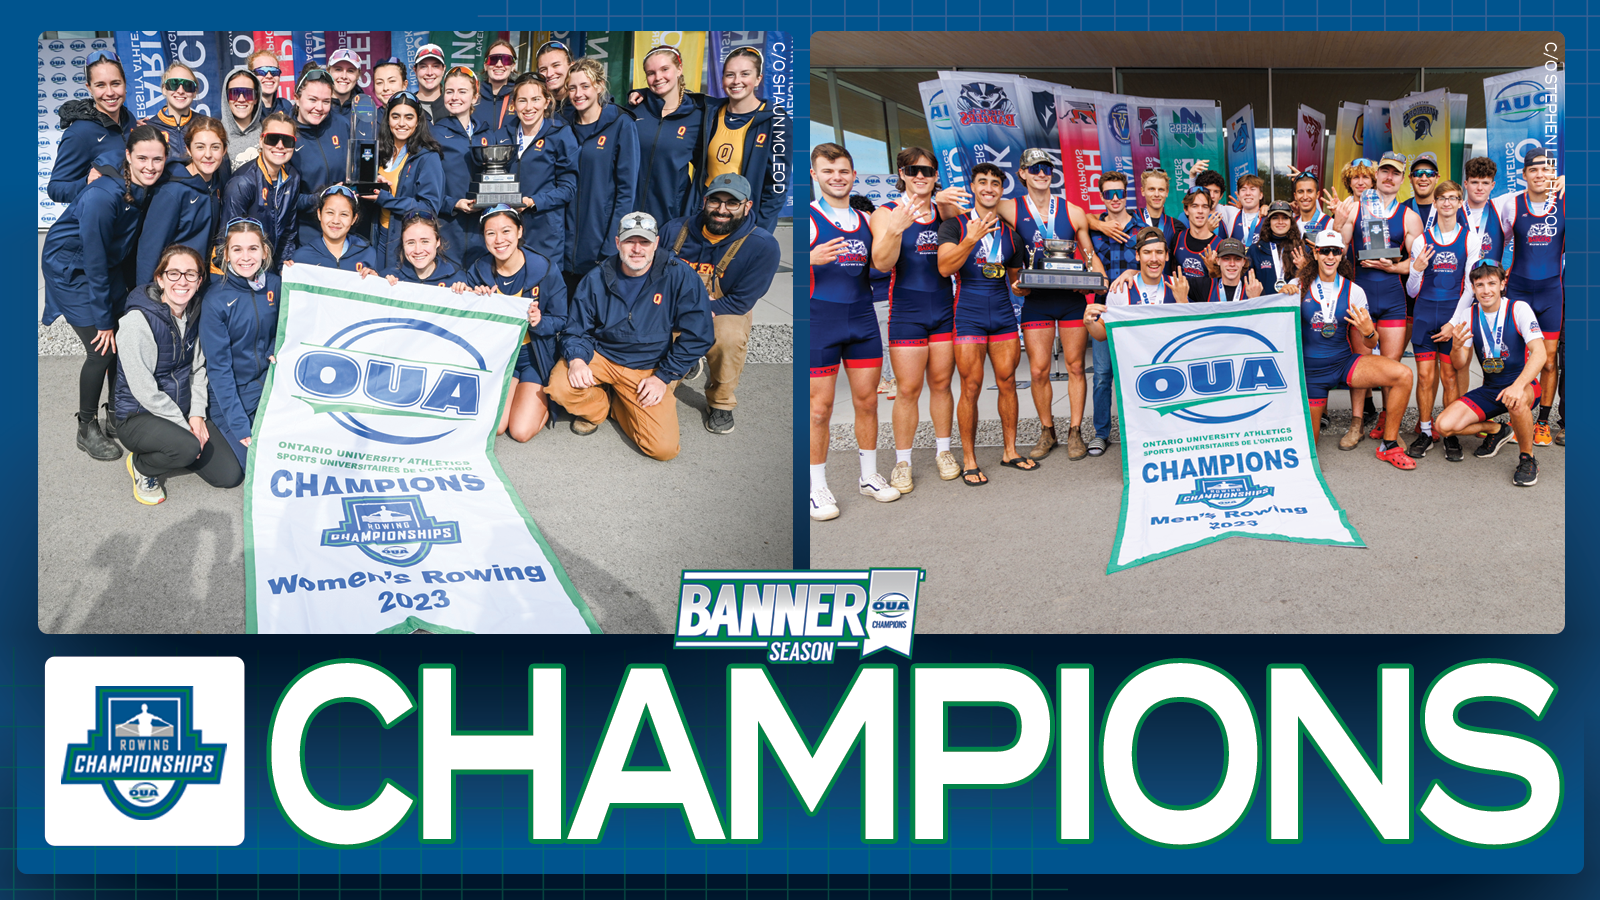 Graphic on predominantly blue background feature banner photos of Queen’s women's and Brock men's rowing teams, with large white text that reads 'Champions' and the OUA Rowing Championships logo underneath them